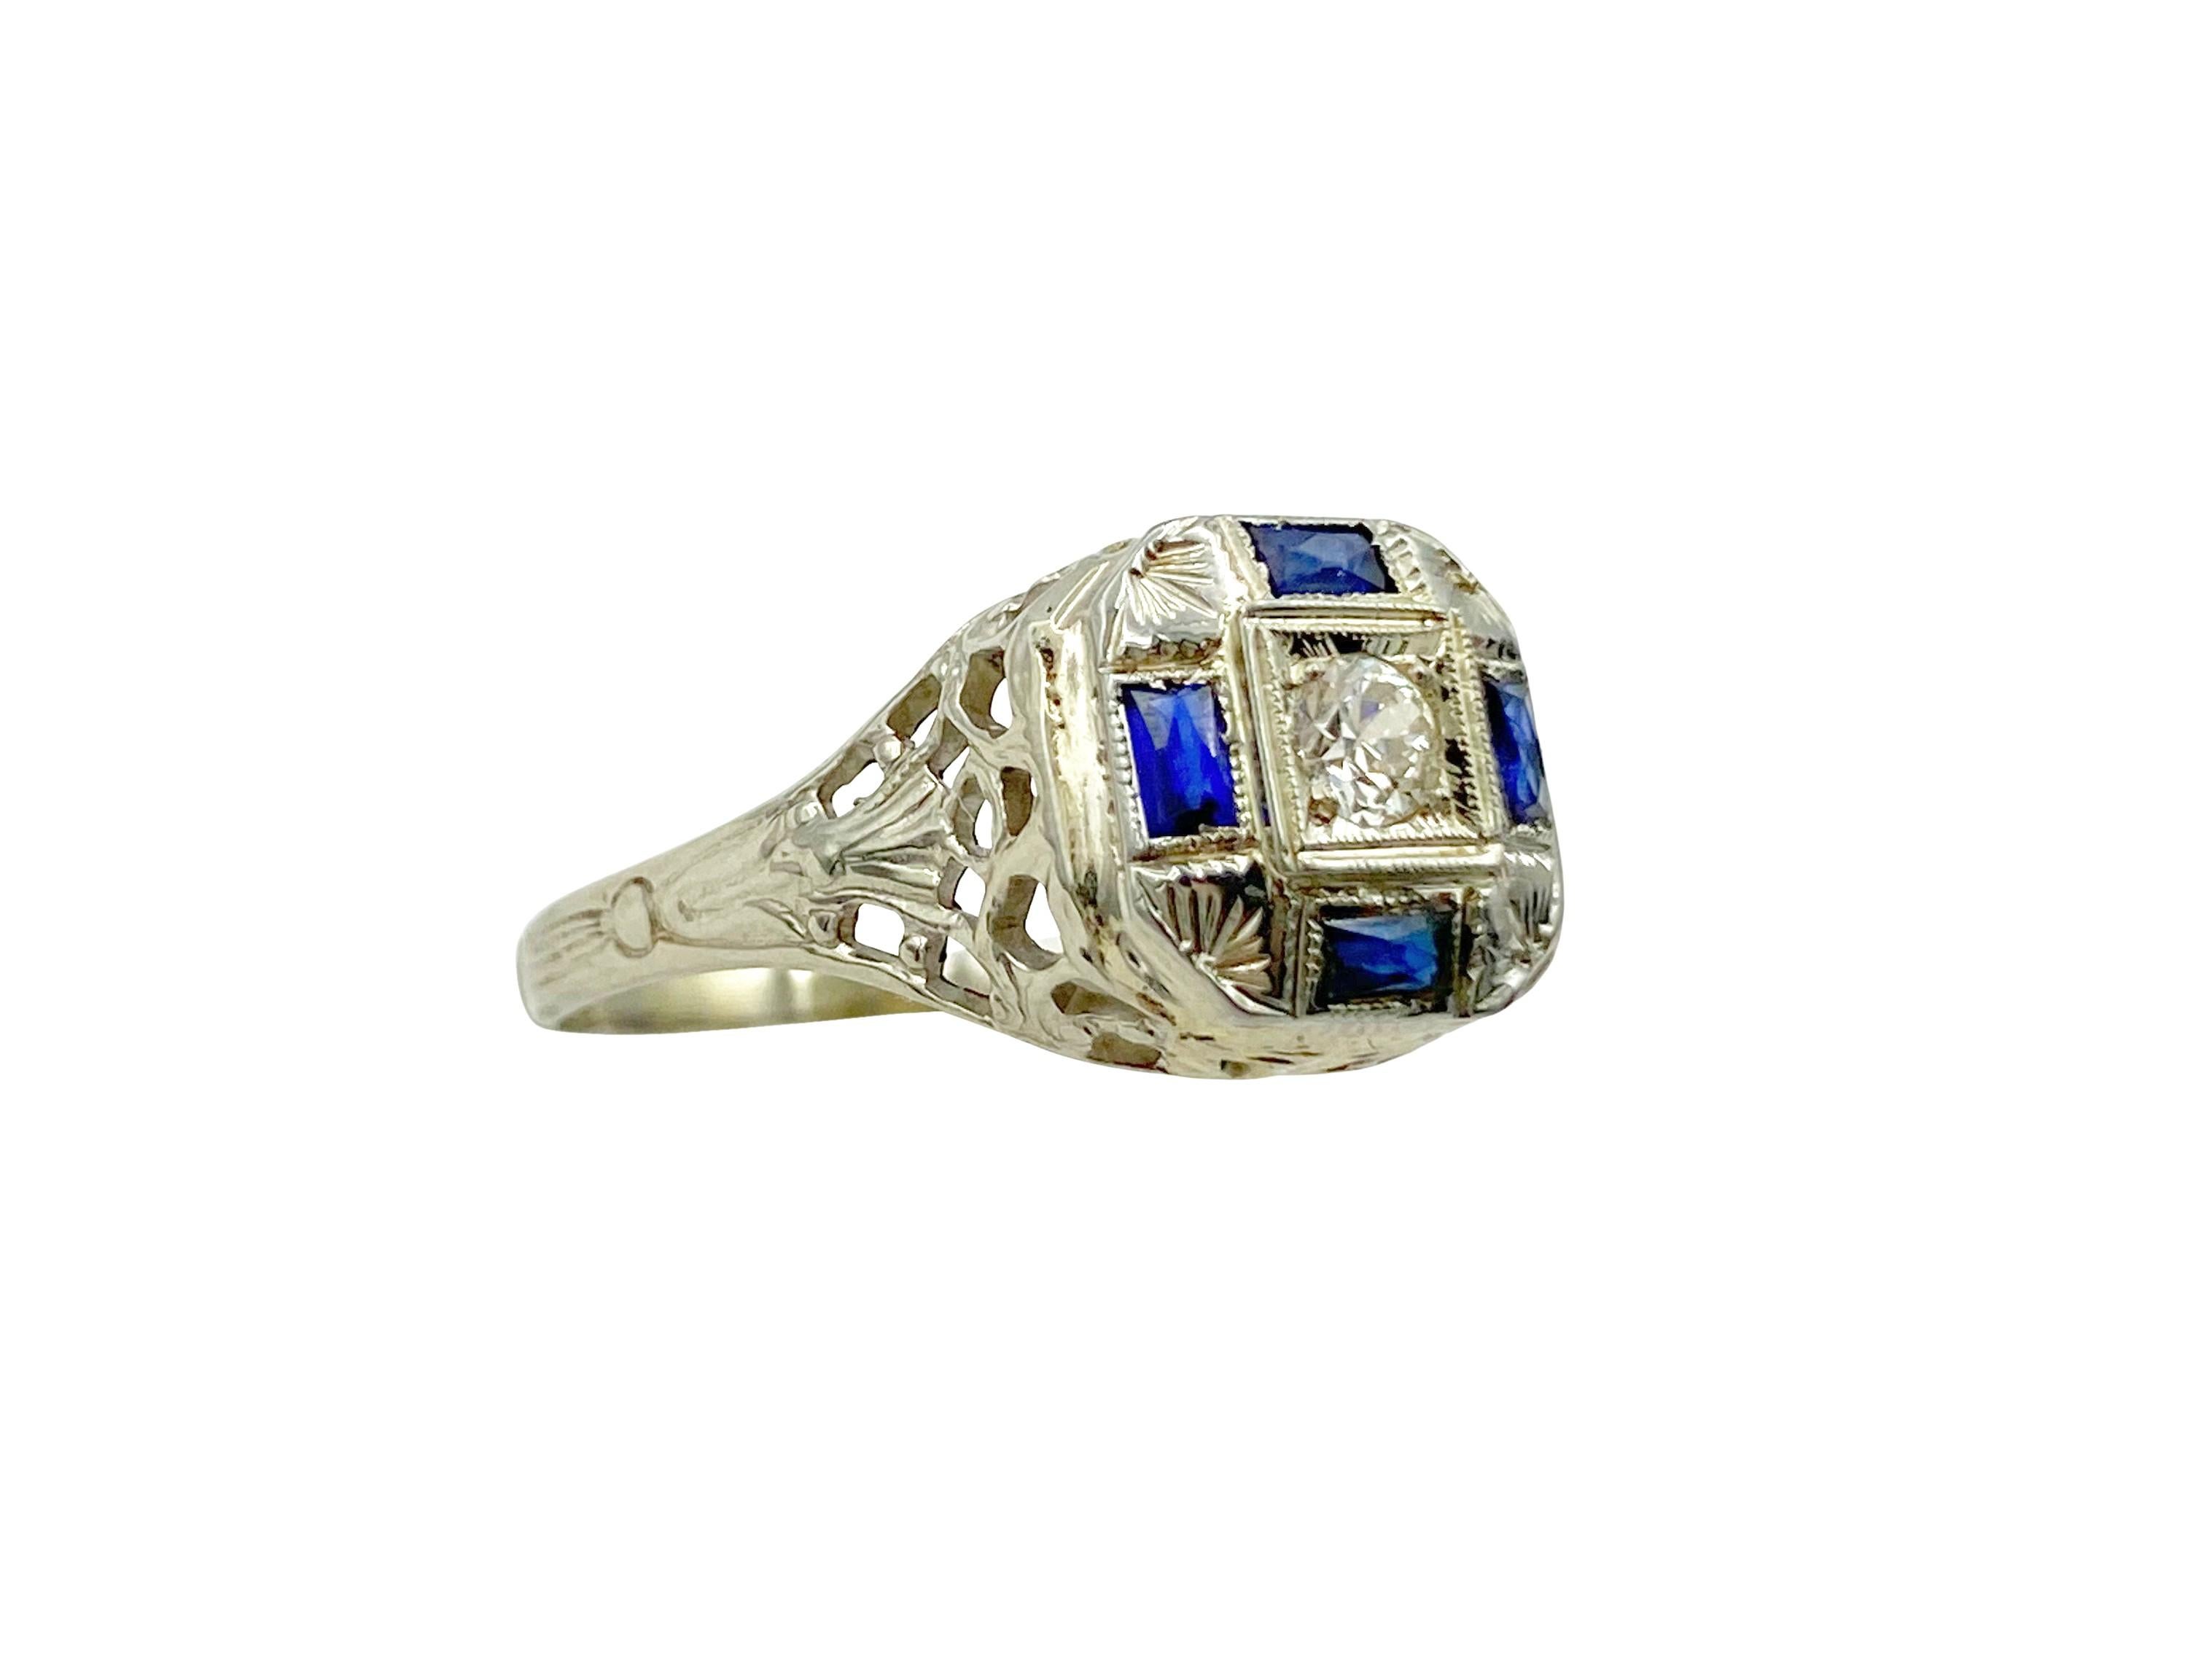 Unique antique diamond and sapphire ring with an octagonal-shaped domed ring front. Four rectangular French cut blue sapphires surround a sparkling old European cut center white diamond. The 14k white gold setting is accented with hand-engraved palm